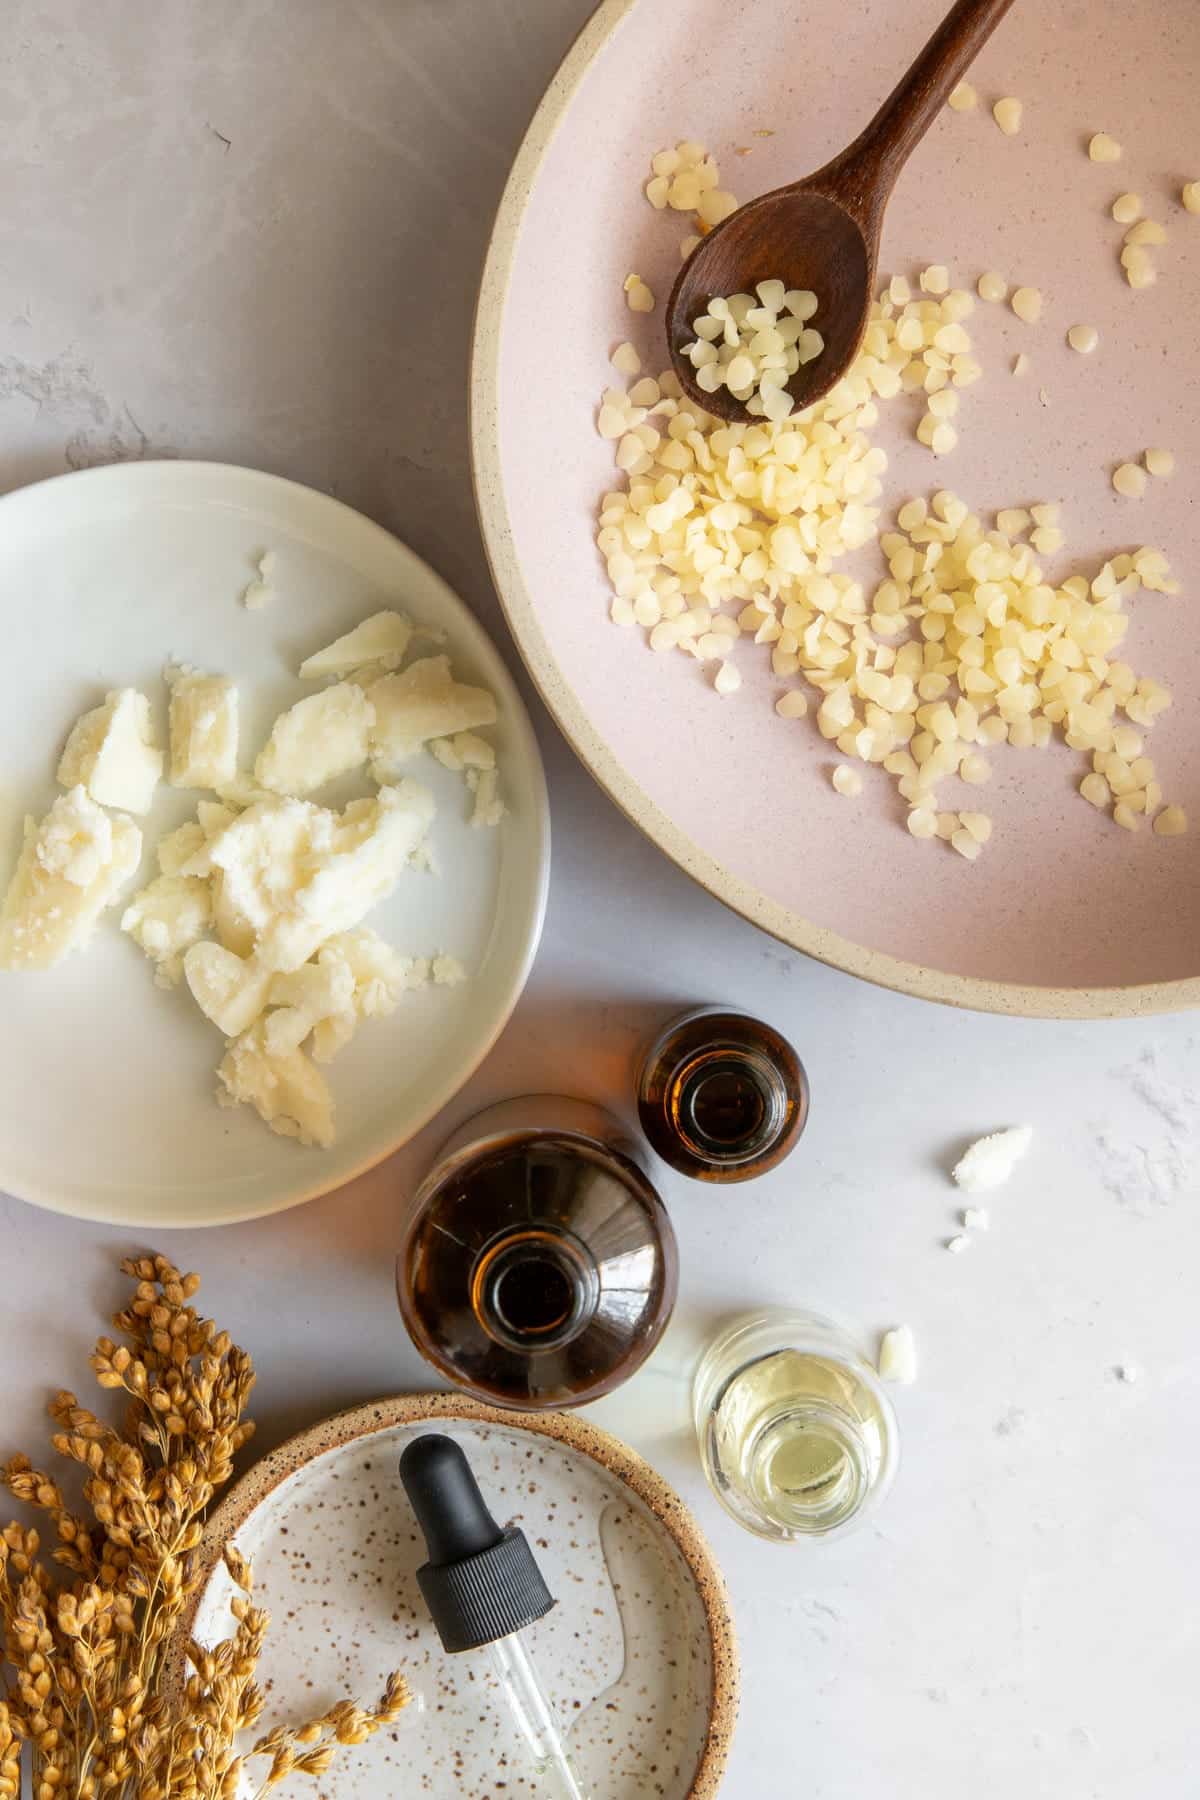 Cuticle balm ingredients